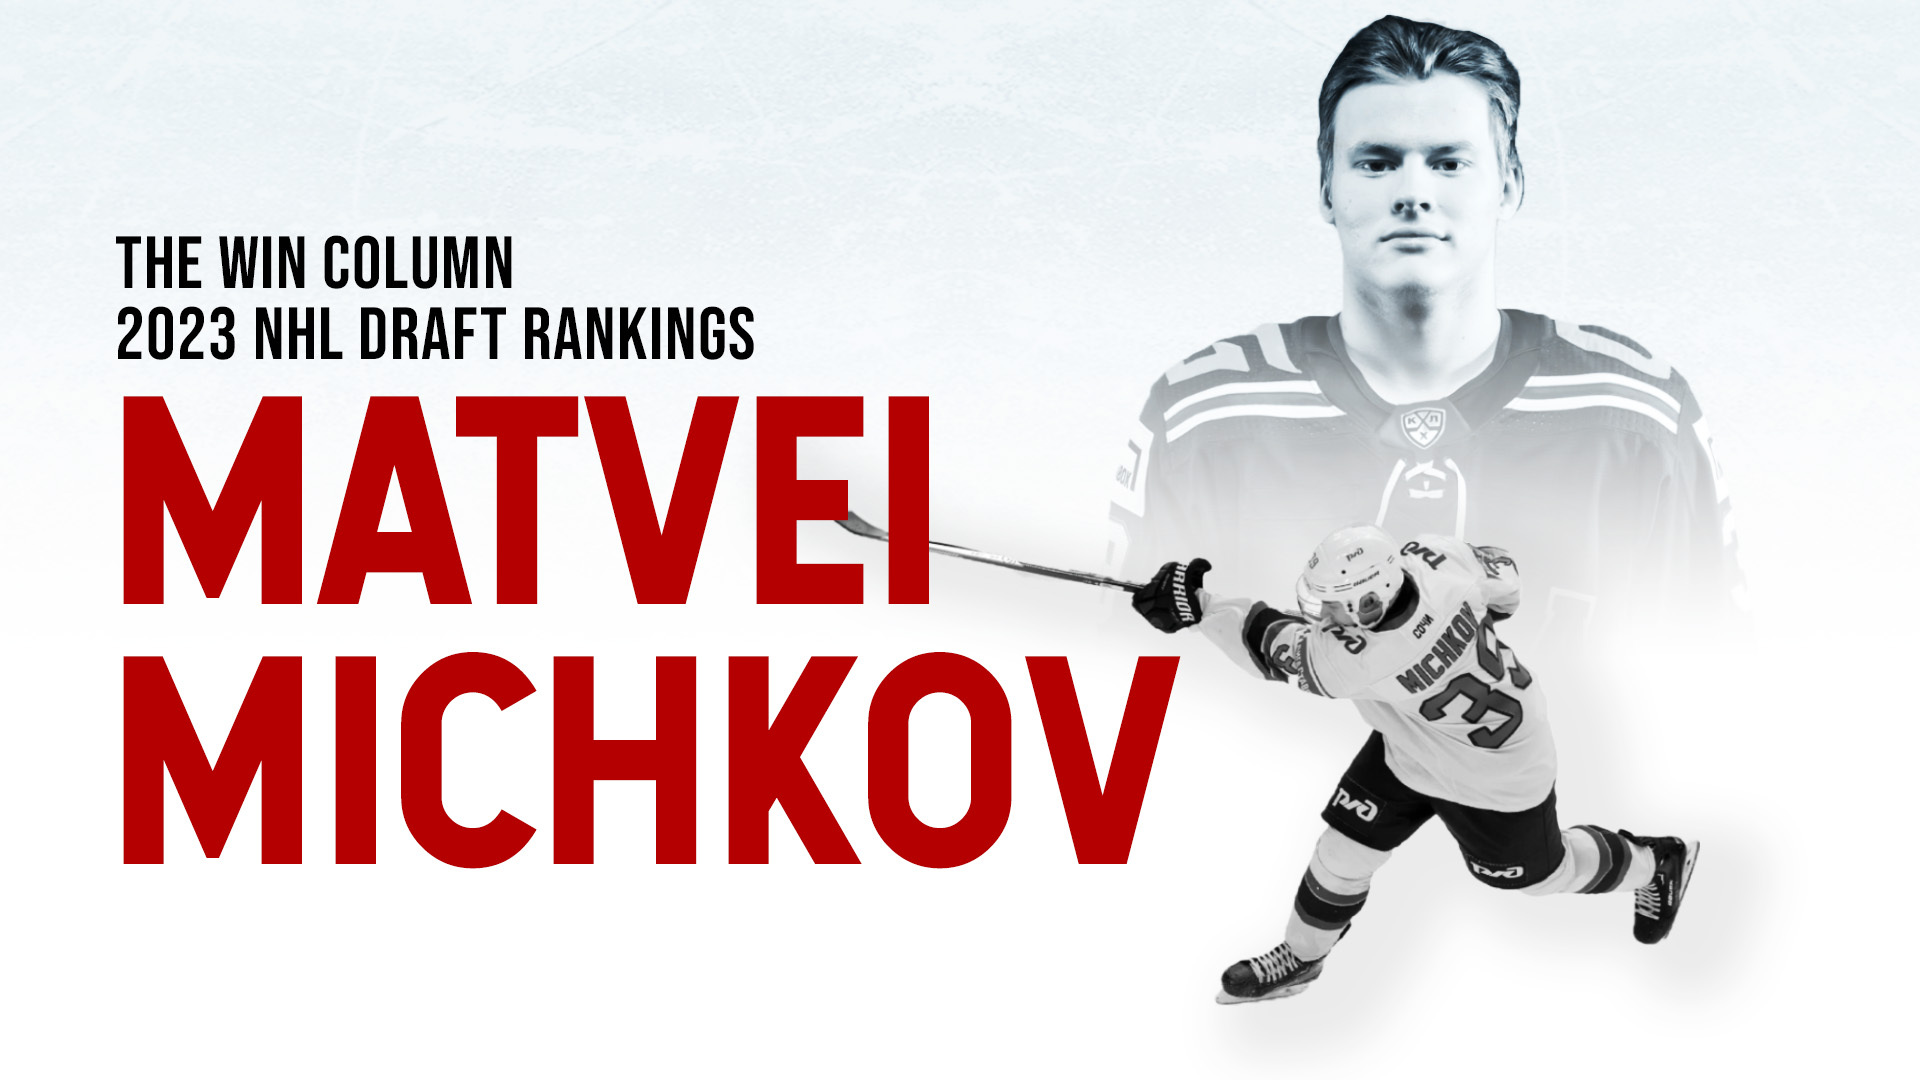 Where to pick Matvei Michkov and other Russian players is a top